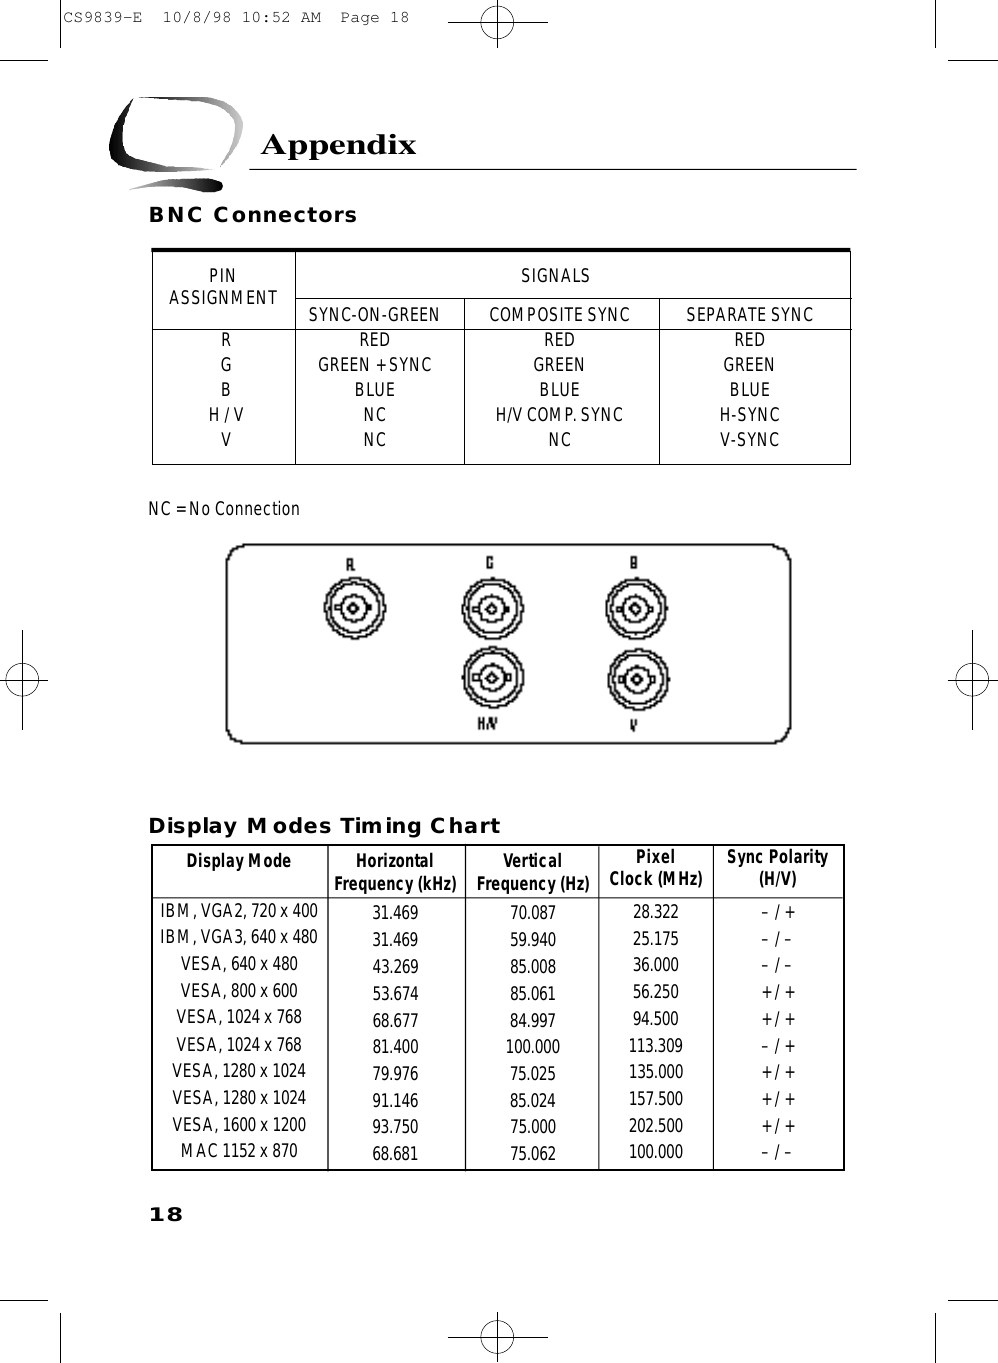 BNC ConnectorsNC = No ConnectionDisplay Modes Timing Chart183A p p e n d i xSYNC-ON-GREEN   COMPOSITE SYNC   SEPARATE SYNCR RED RED REDG GREEN + SYNC GREEN GREENB BLUE BLUE BLUEH / V NC H/V COMP. SYNC H-SYNCV NC NC V-SYNCSIGNALSPIN ASSIGNMENTDisplay ModeIBM, VGA2, 720 x 400IBM, VGA3, 640 x 480VESA, 640 x 480VESA, 800 x 600VESA, 1024 x 768VESA, 1024 x 768VESA, 1280 x 1024VESA, 1280 x 1024VESA, 1600 x 1200MAC 1152 x 870HorizontalFrequency (kHz)31.46931.46943.26953.67468.67781.40079.97691.14693.75068.681VerticalFrequency (Hz)70.08759.94085.00885.06184.997100.00075.02585.02475.00075.062PixelClock (MHz)28.32225.17536.00056.25094.500113.309135.000157.500202.500100.000Sync Polarity(H/V)– / +– / –– / –+ / ++ / +– / ++ / ++ / ++ / +– / –CS9839-E  10/8/98 10:52 AM  Page 18